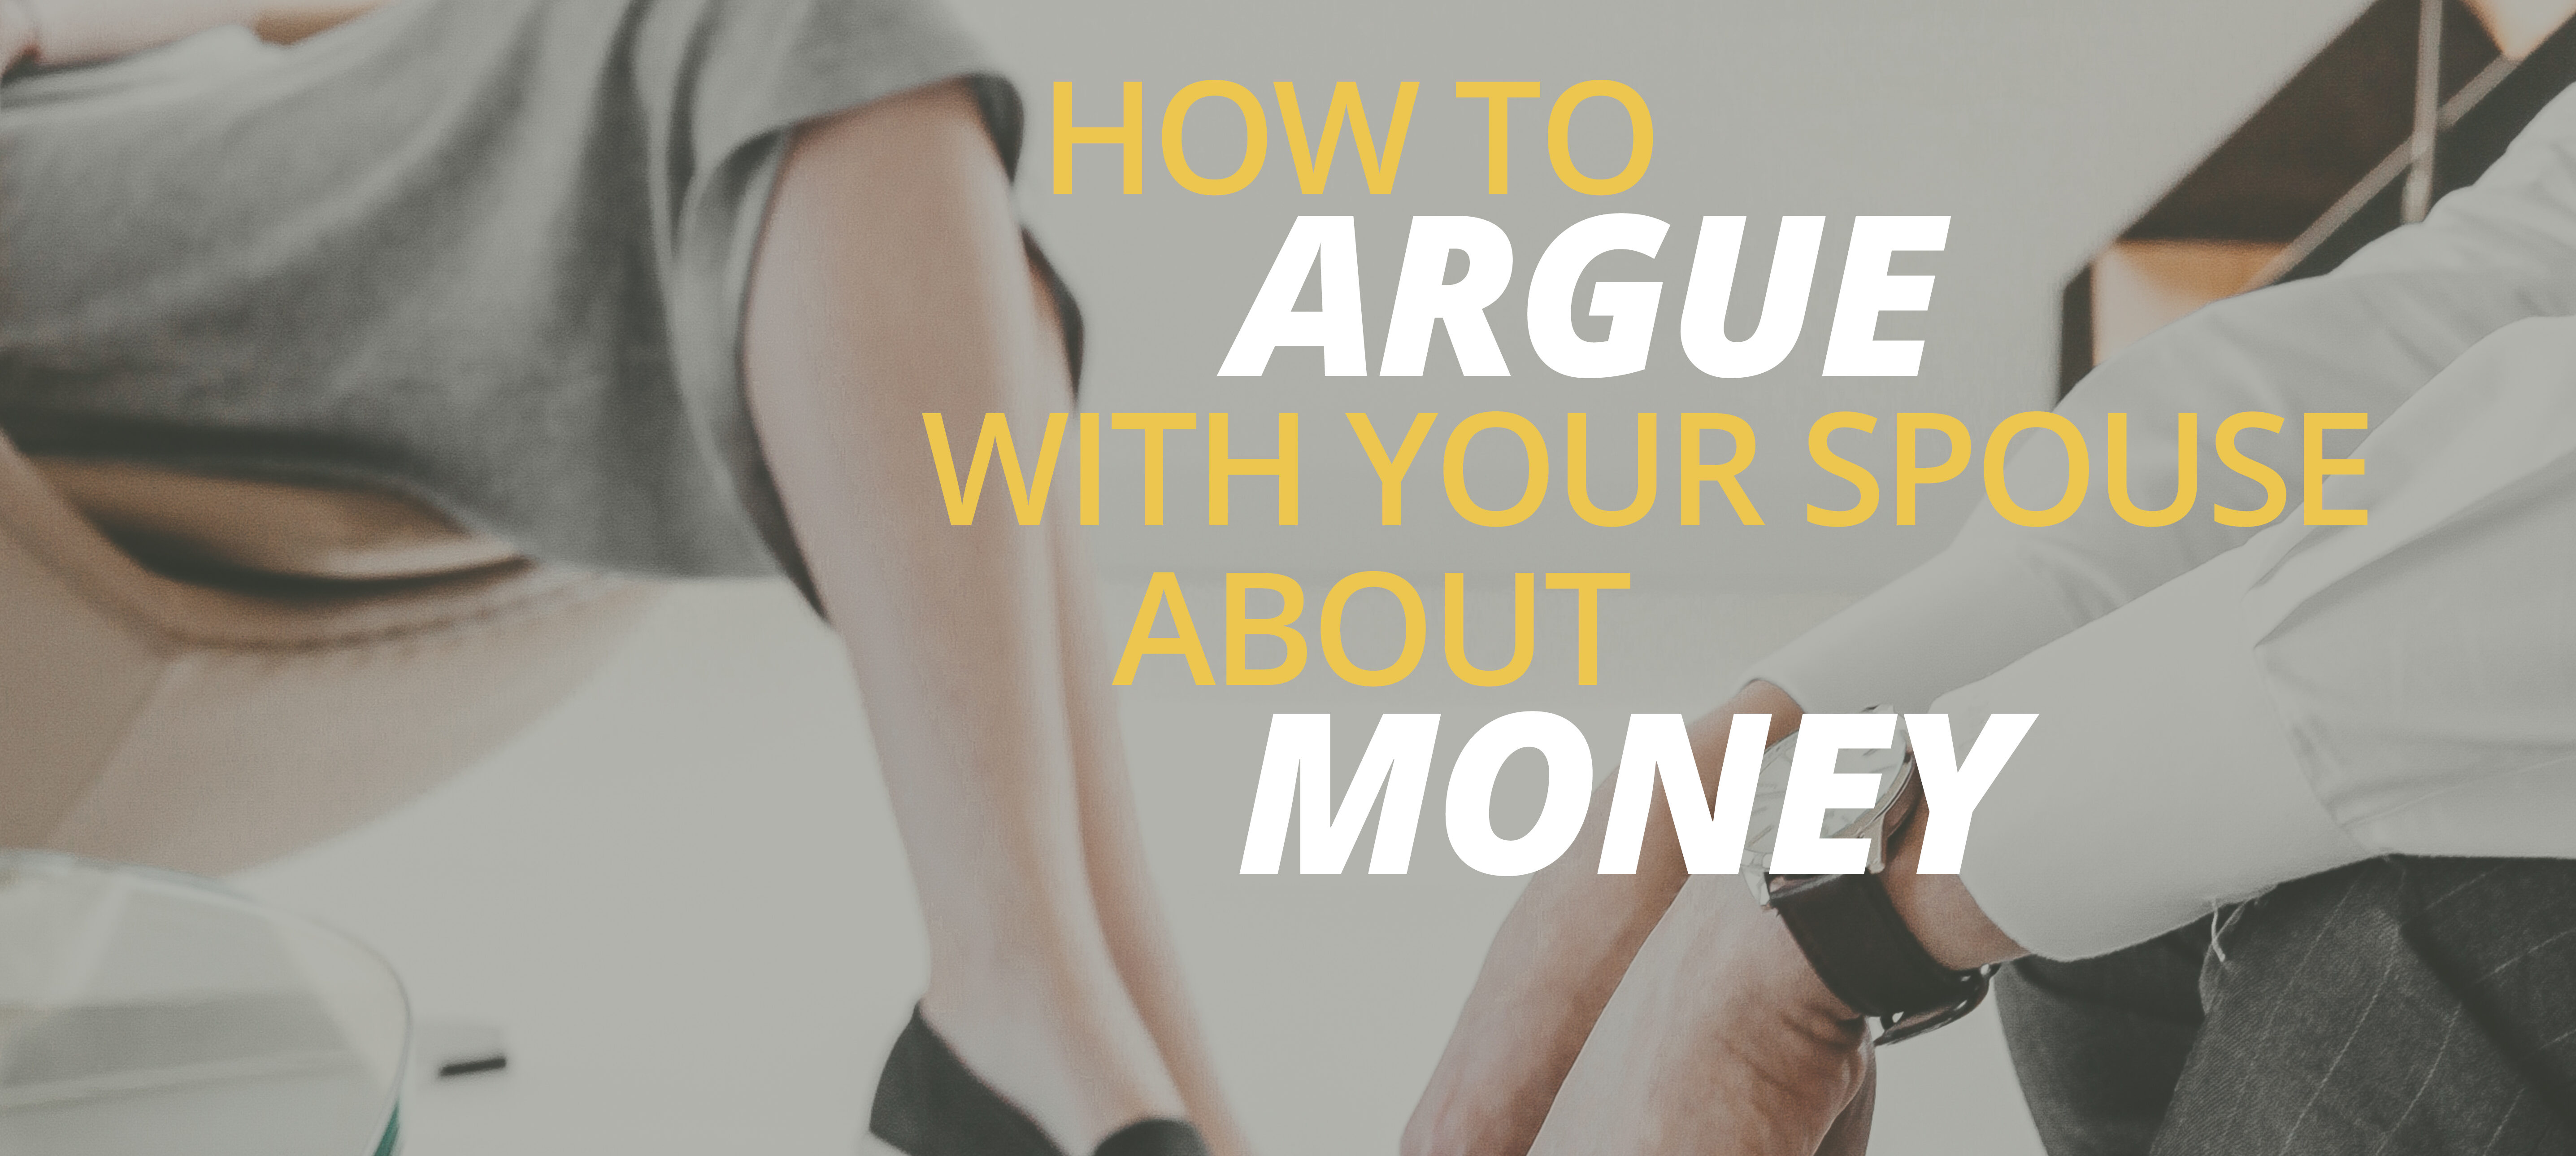 How to Argue With Your Spouse About Money